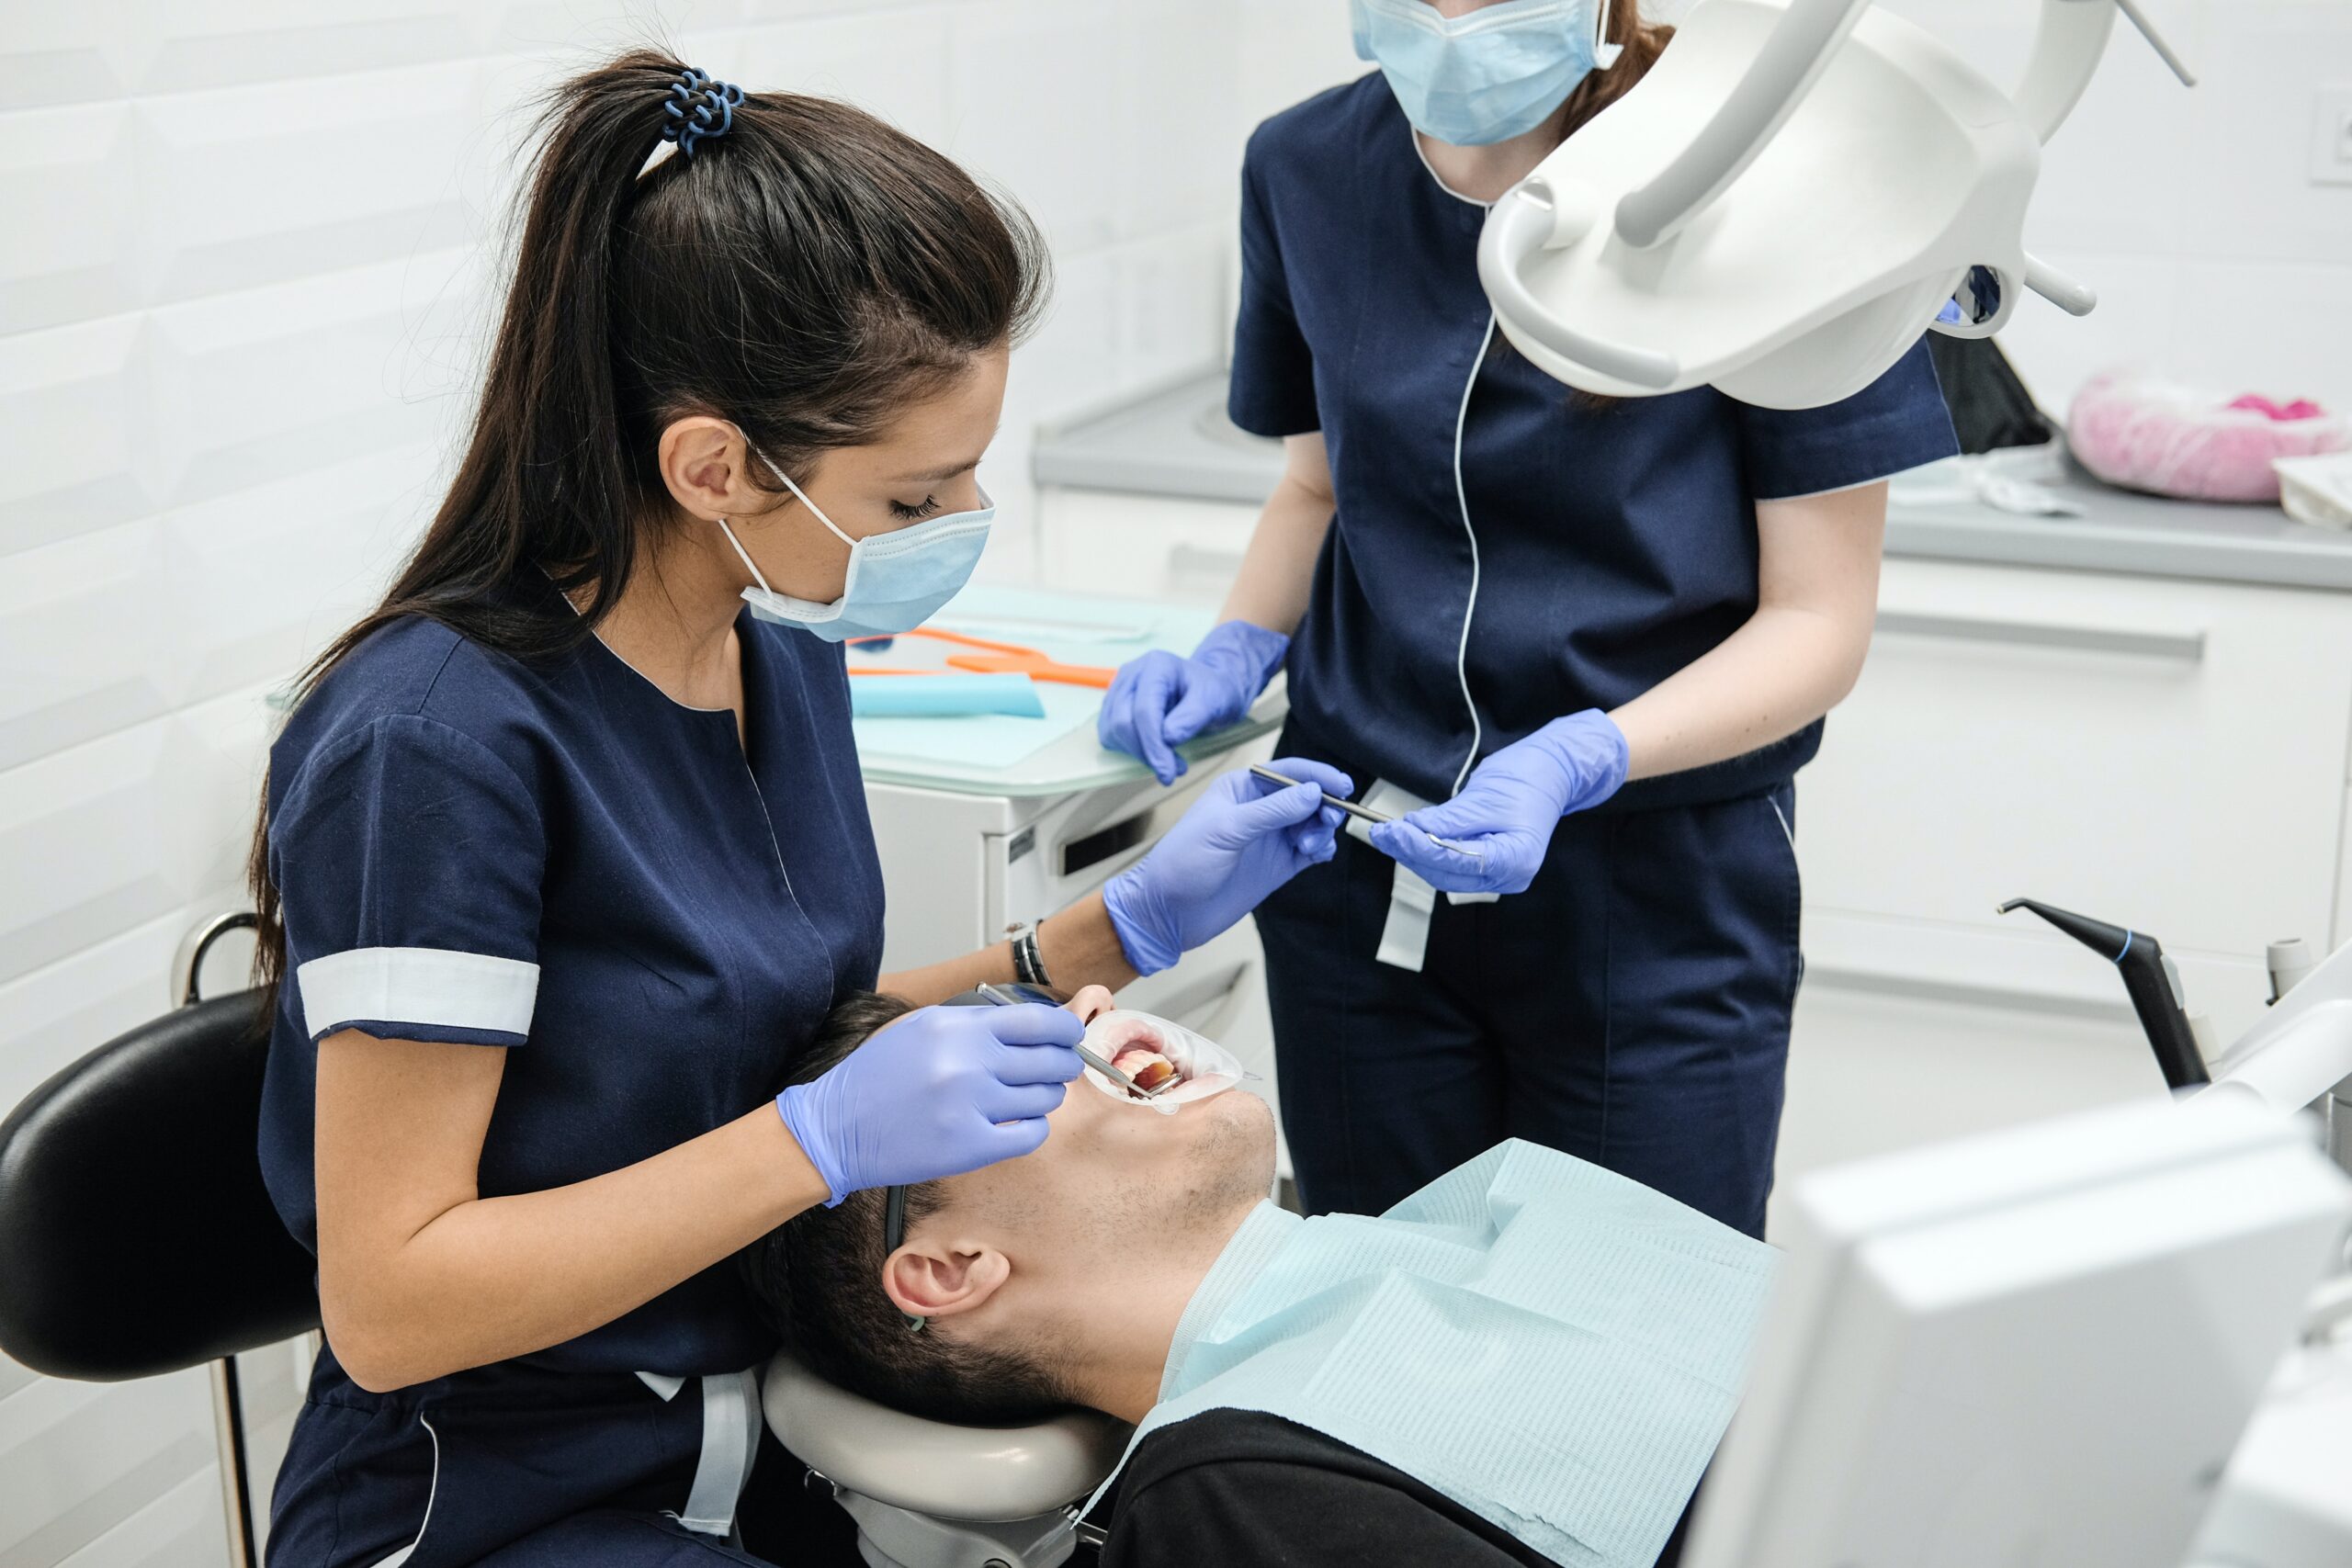 RCT IN BANGALORE, ROOT CANAL TREATMENT COST IN BANGALORE, ROOT CANAL COST IN BANGALORE, ROOT CANAL TREATMENT IN BANGALORE, COST OF ROOT CANAL TREATMENT IN BANGALORE